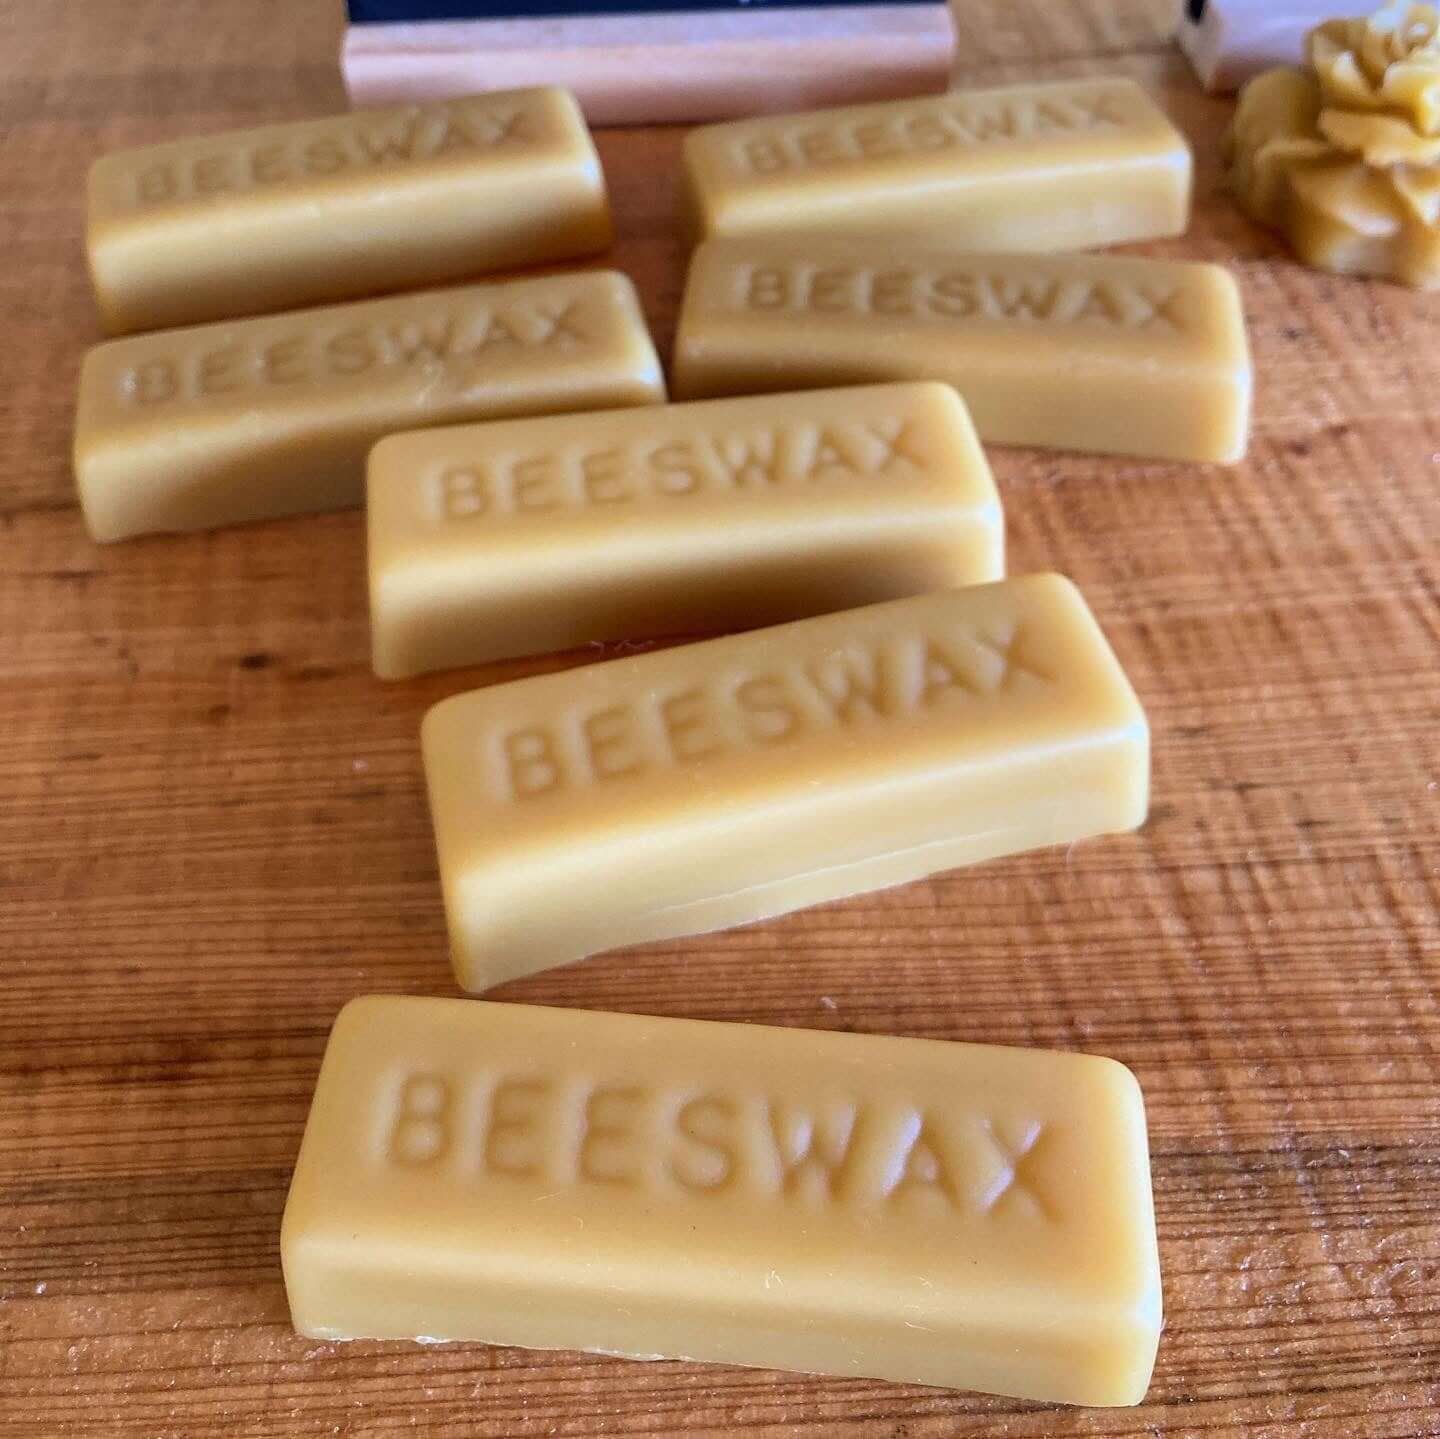 The Country Seat: Pure Beeswax Block 1 pound 5 oz